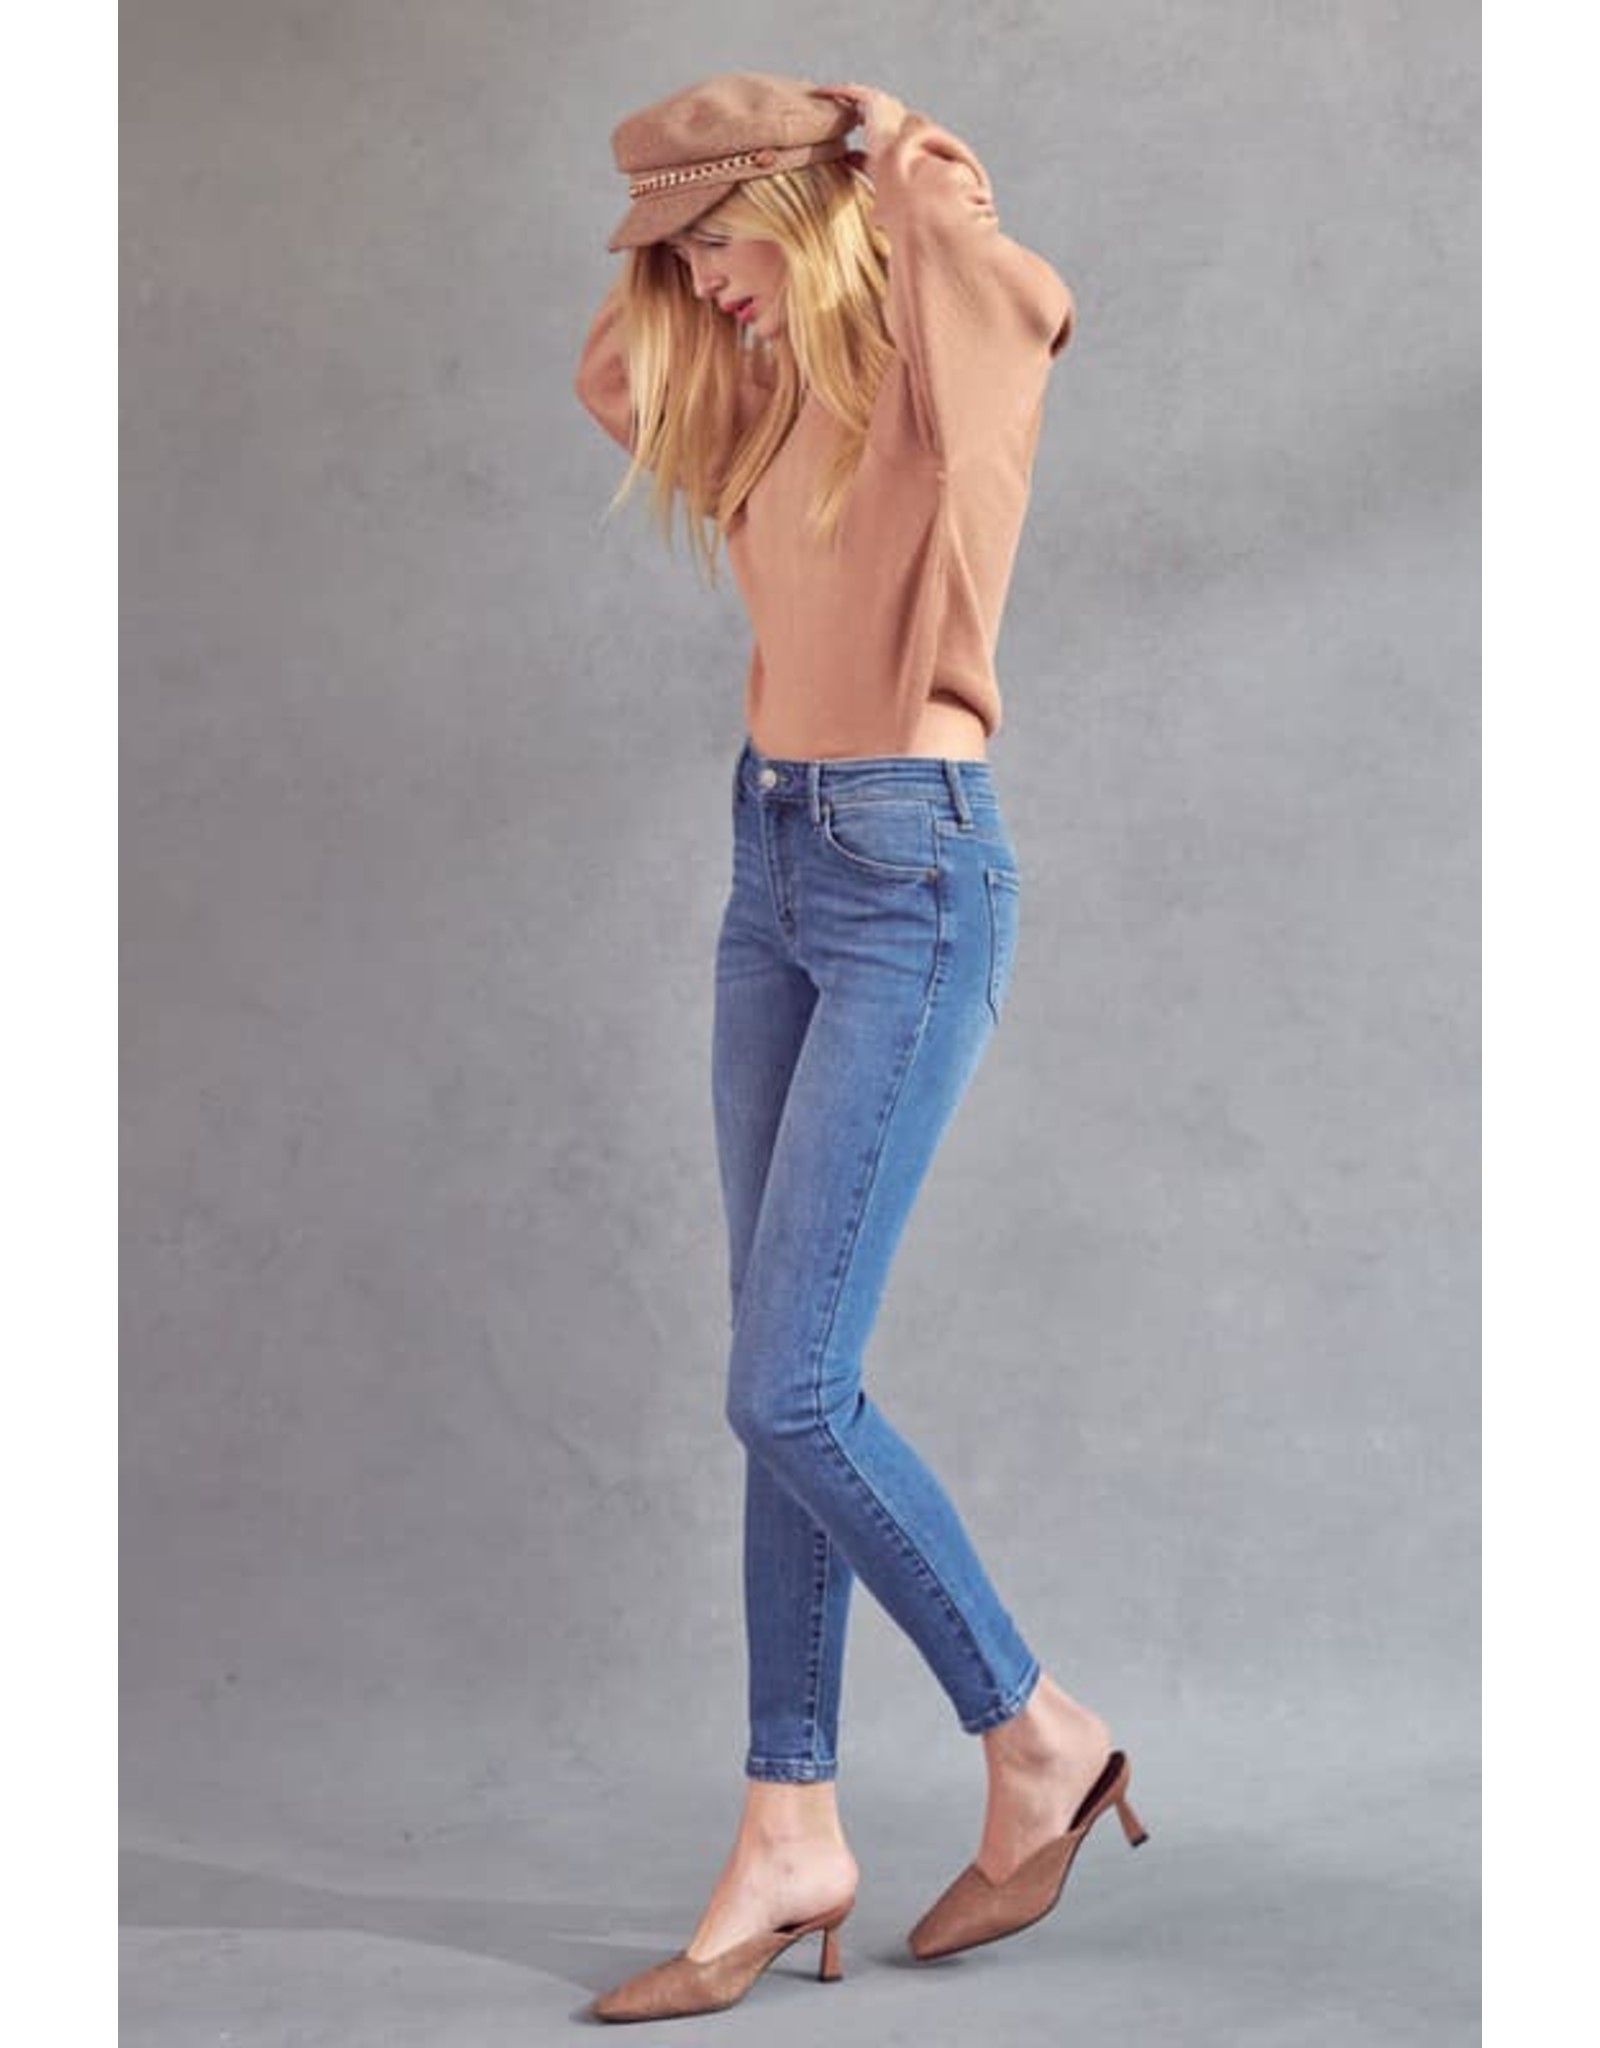 Caprice High Rise KanCan Jeans